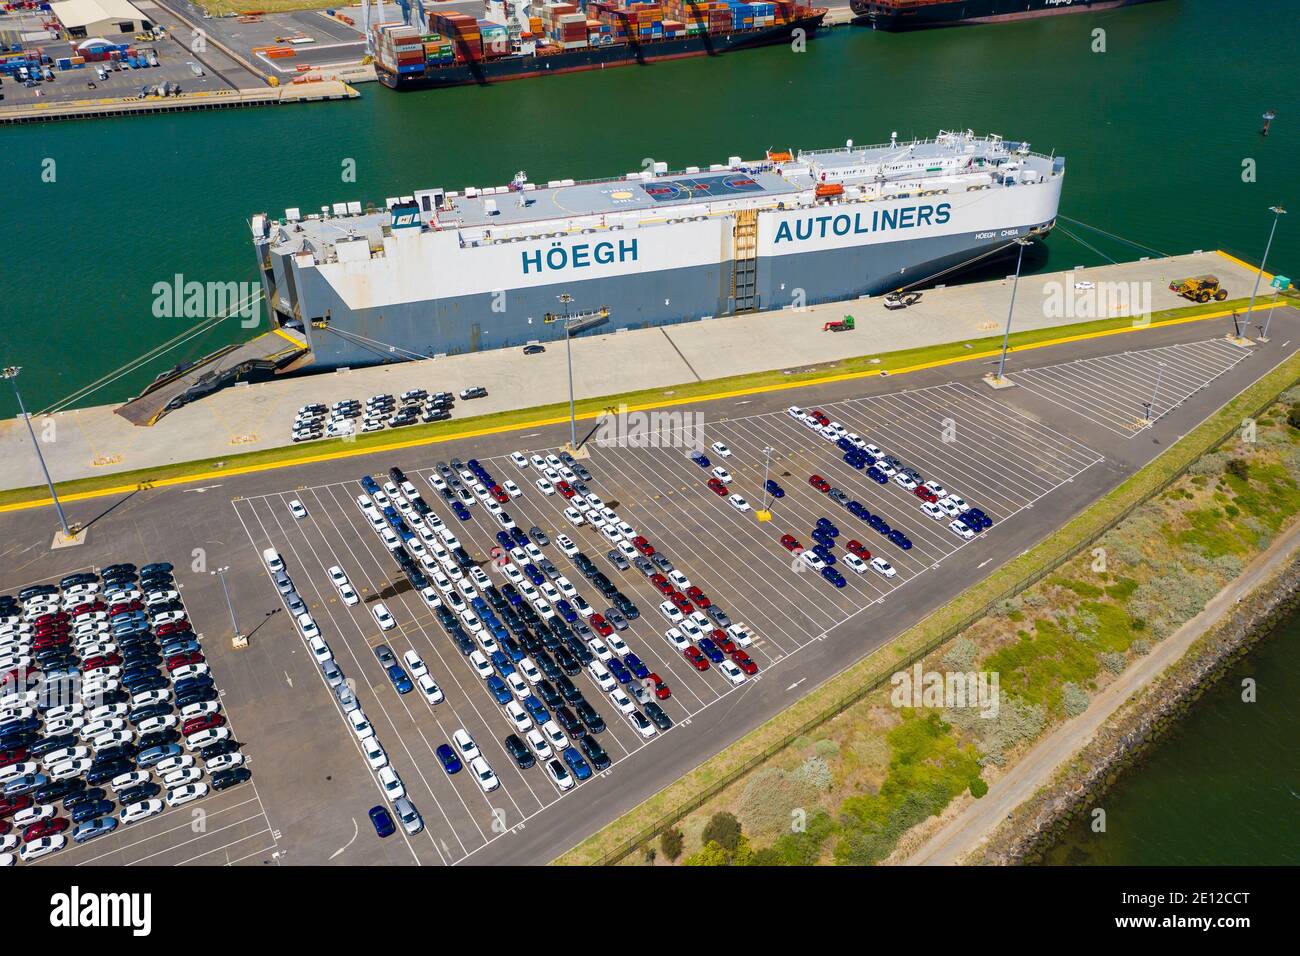 Aerial photo of vehicles waiting to be loaded onto car carrier at port Stock Photo